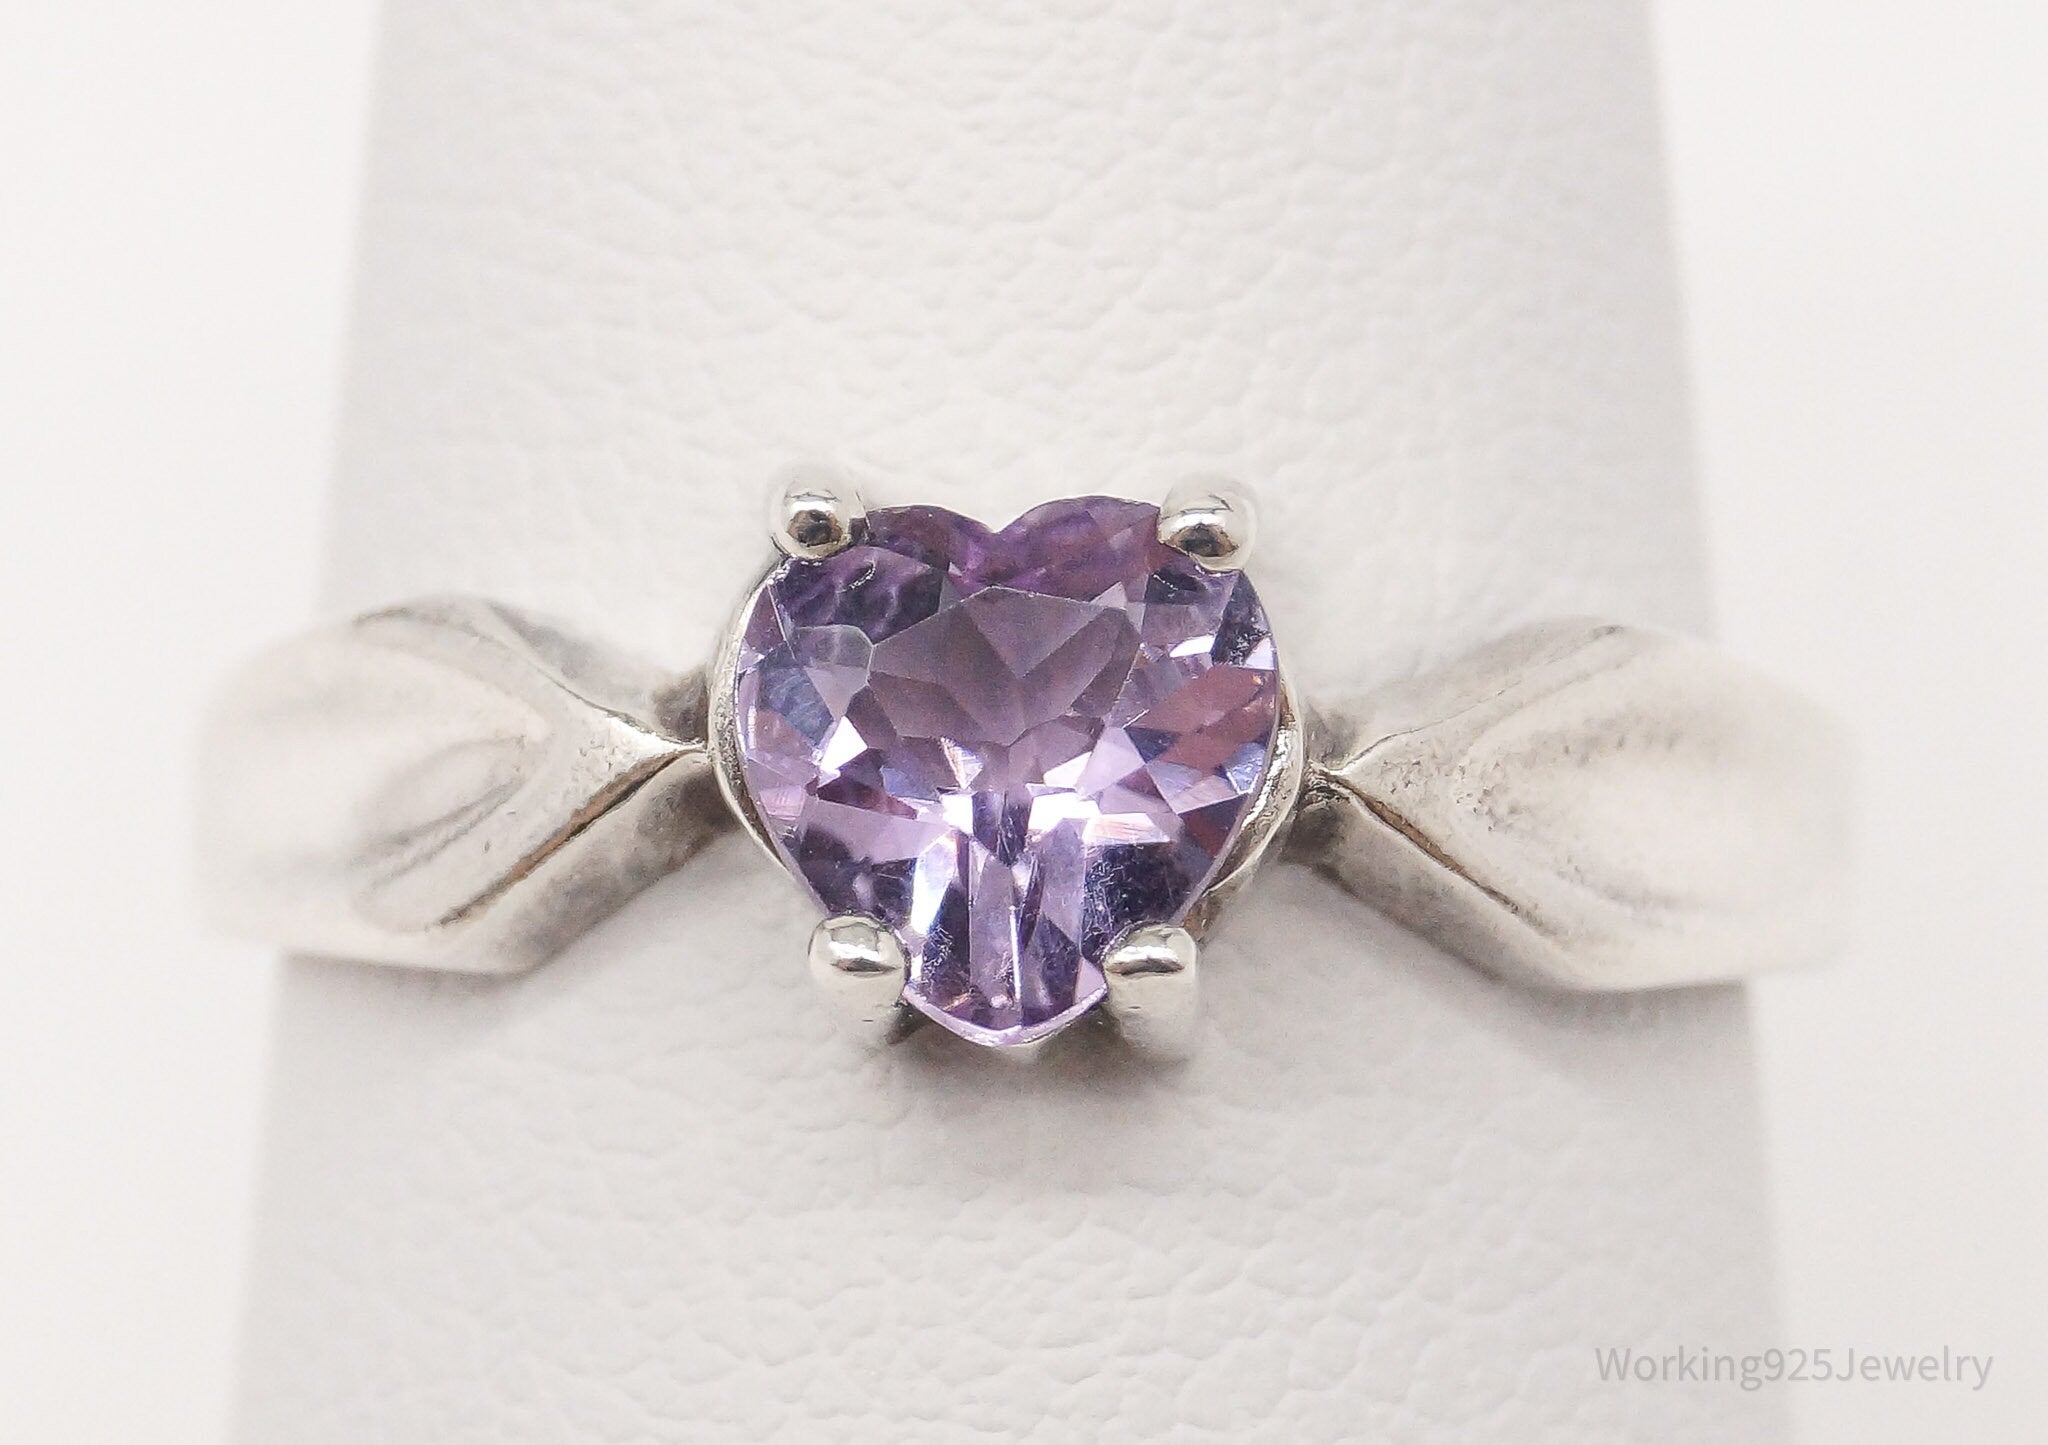 Vintage Amethyst Heart Sterling Silver Ring - Size 7